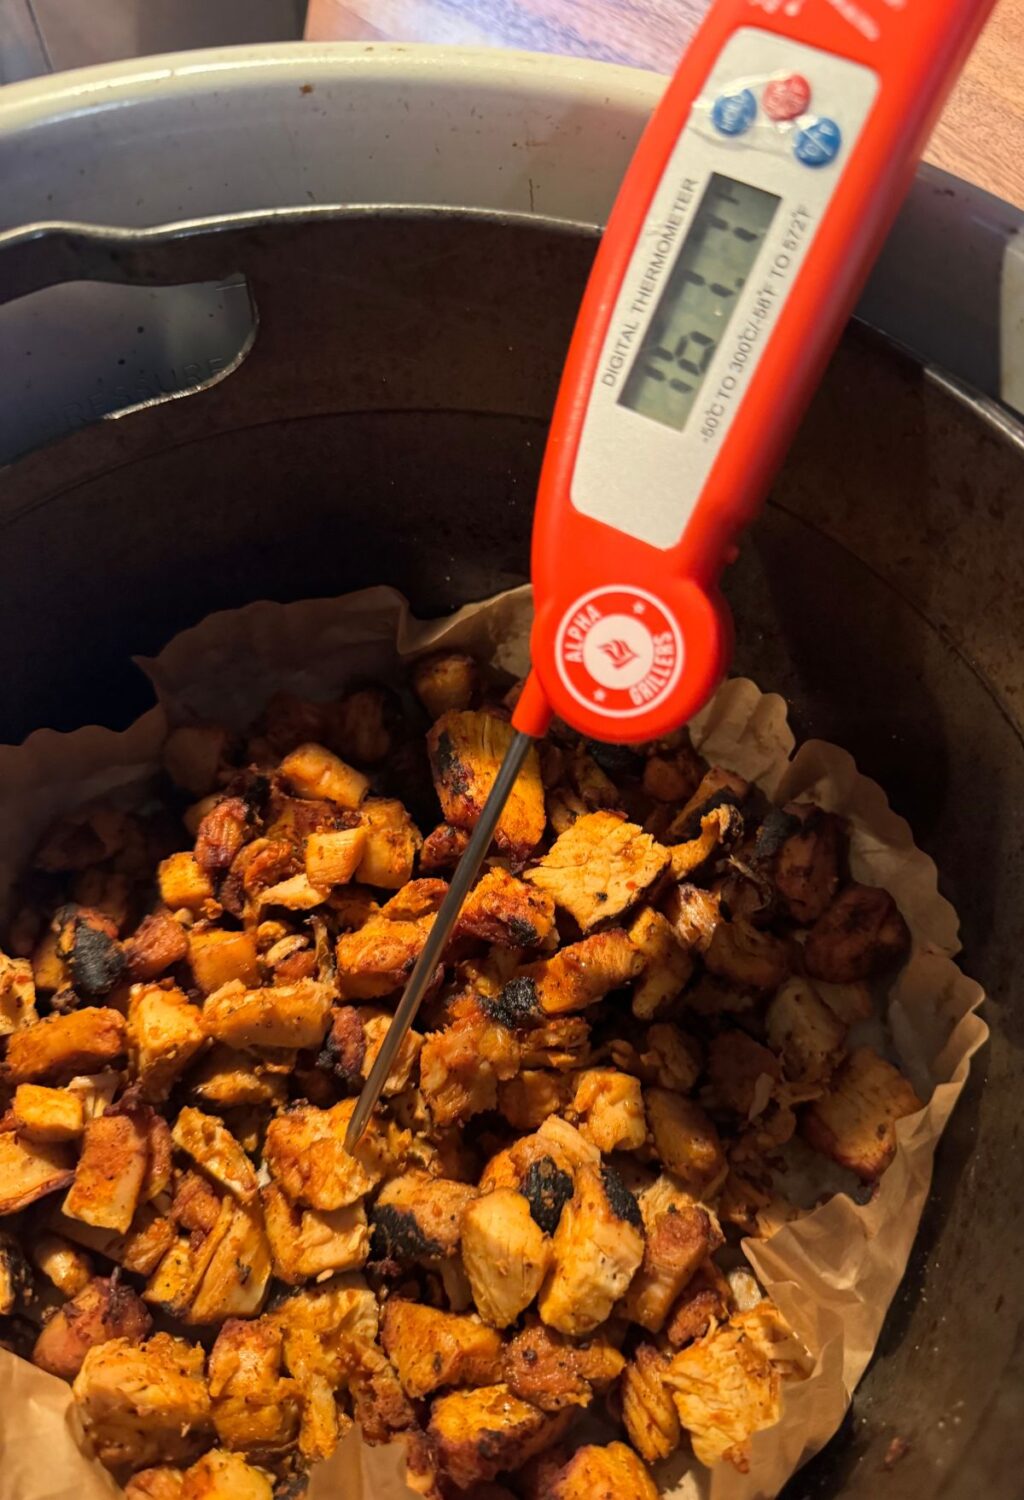 A thermometer is being used to check the temperature of some food.